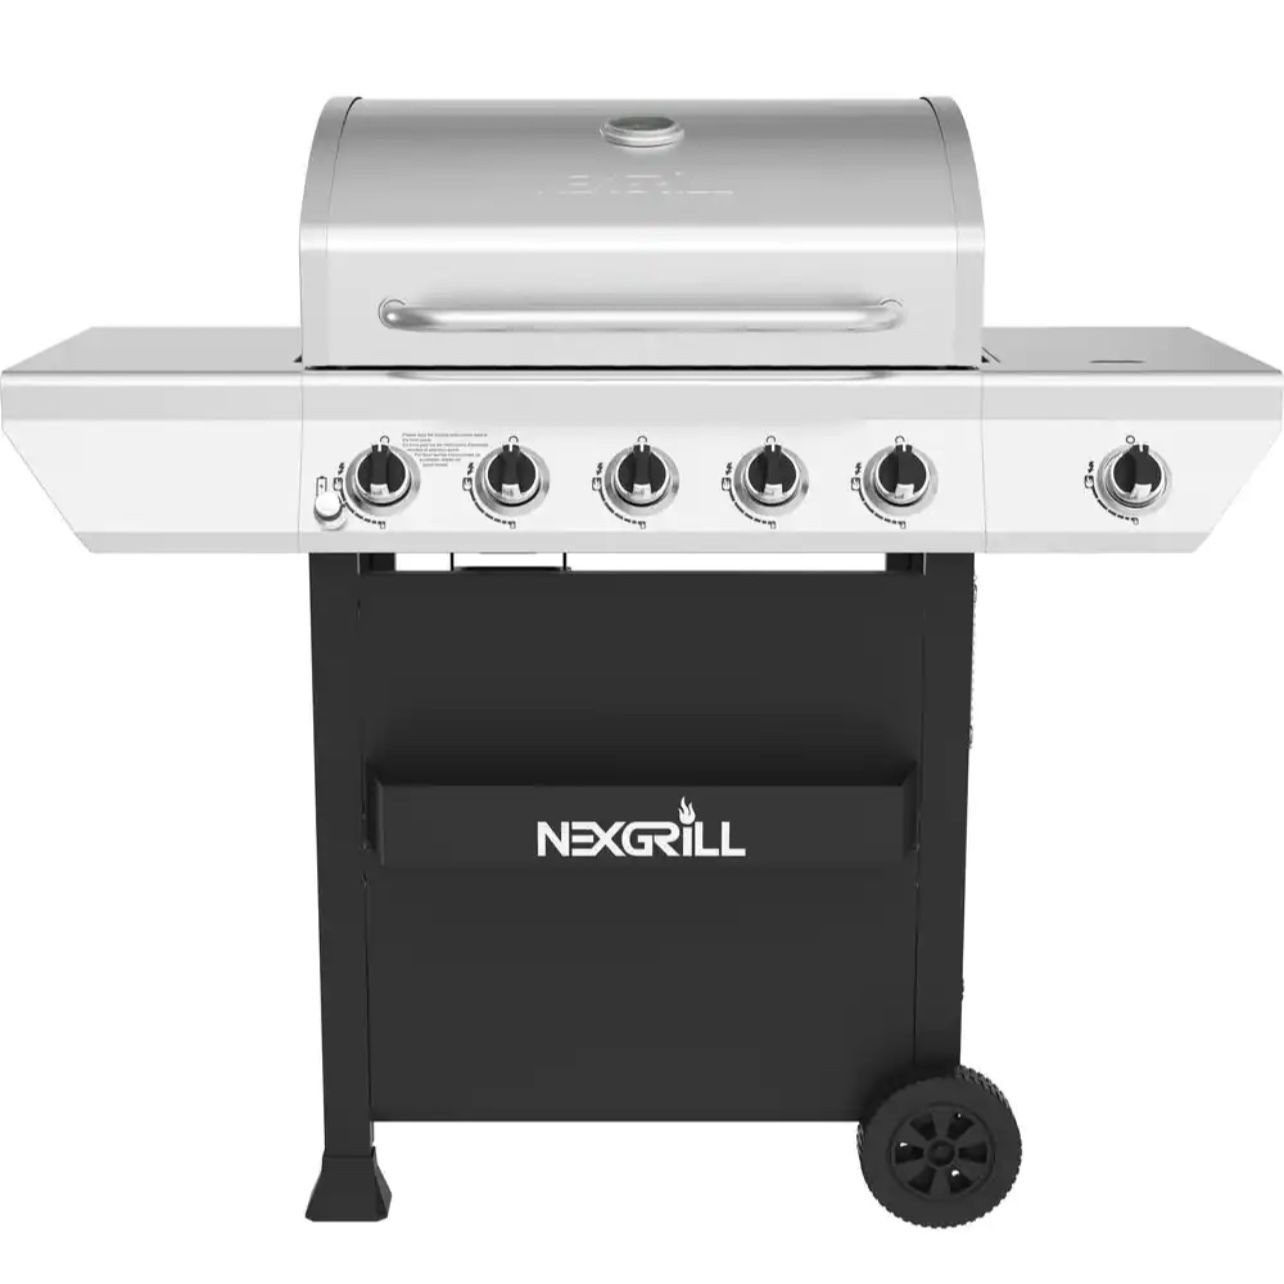 Nexgrill 5-Burner Propane Gas Grill in Stainless Steel with Side Burner and Condiment Rack